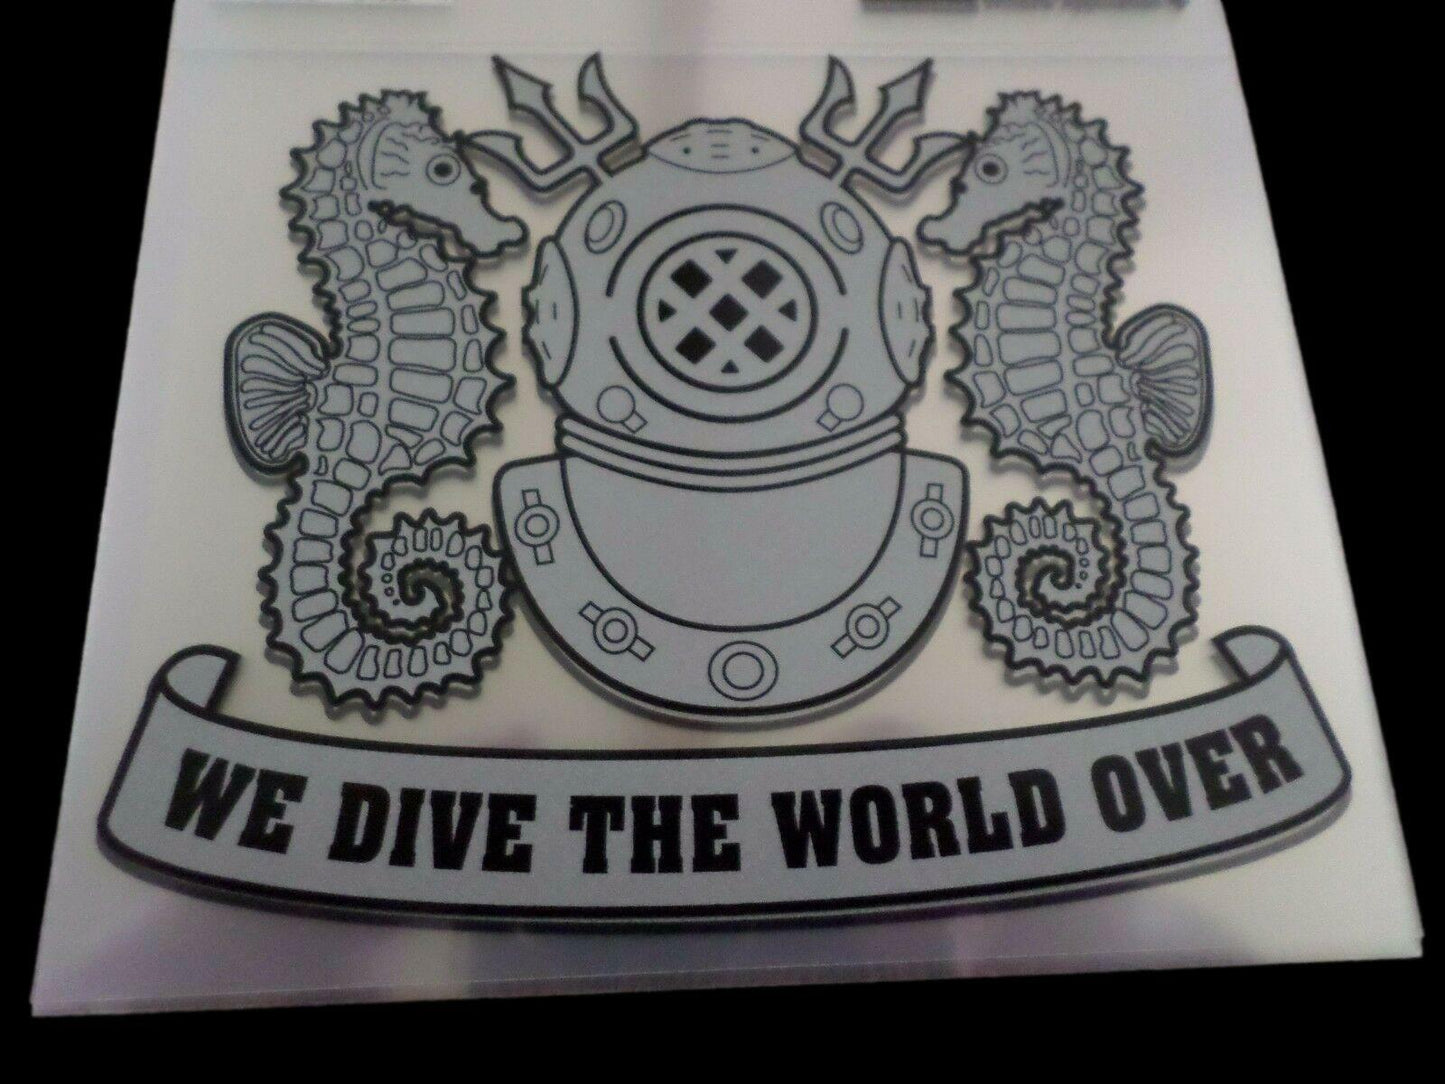 U.S MILITARY NAVY DEEP SEA DIVER WINDOW DECAL STICKER 5.25" X 4.25" INCHES